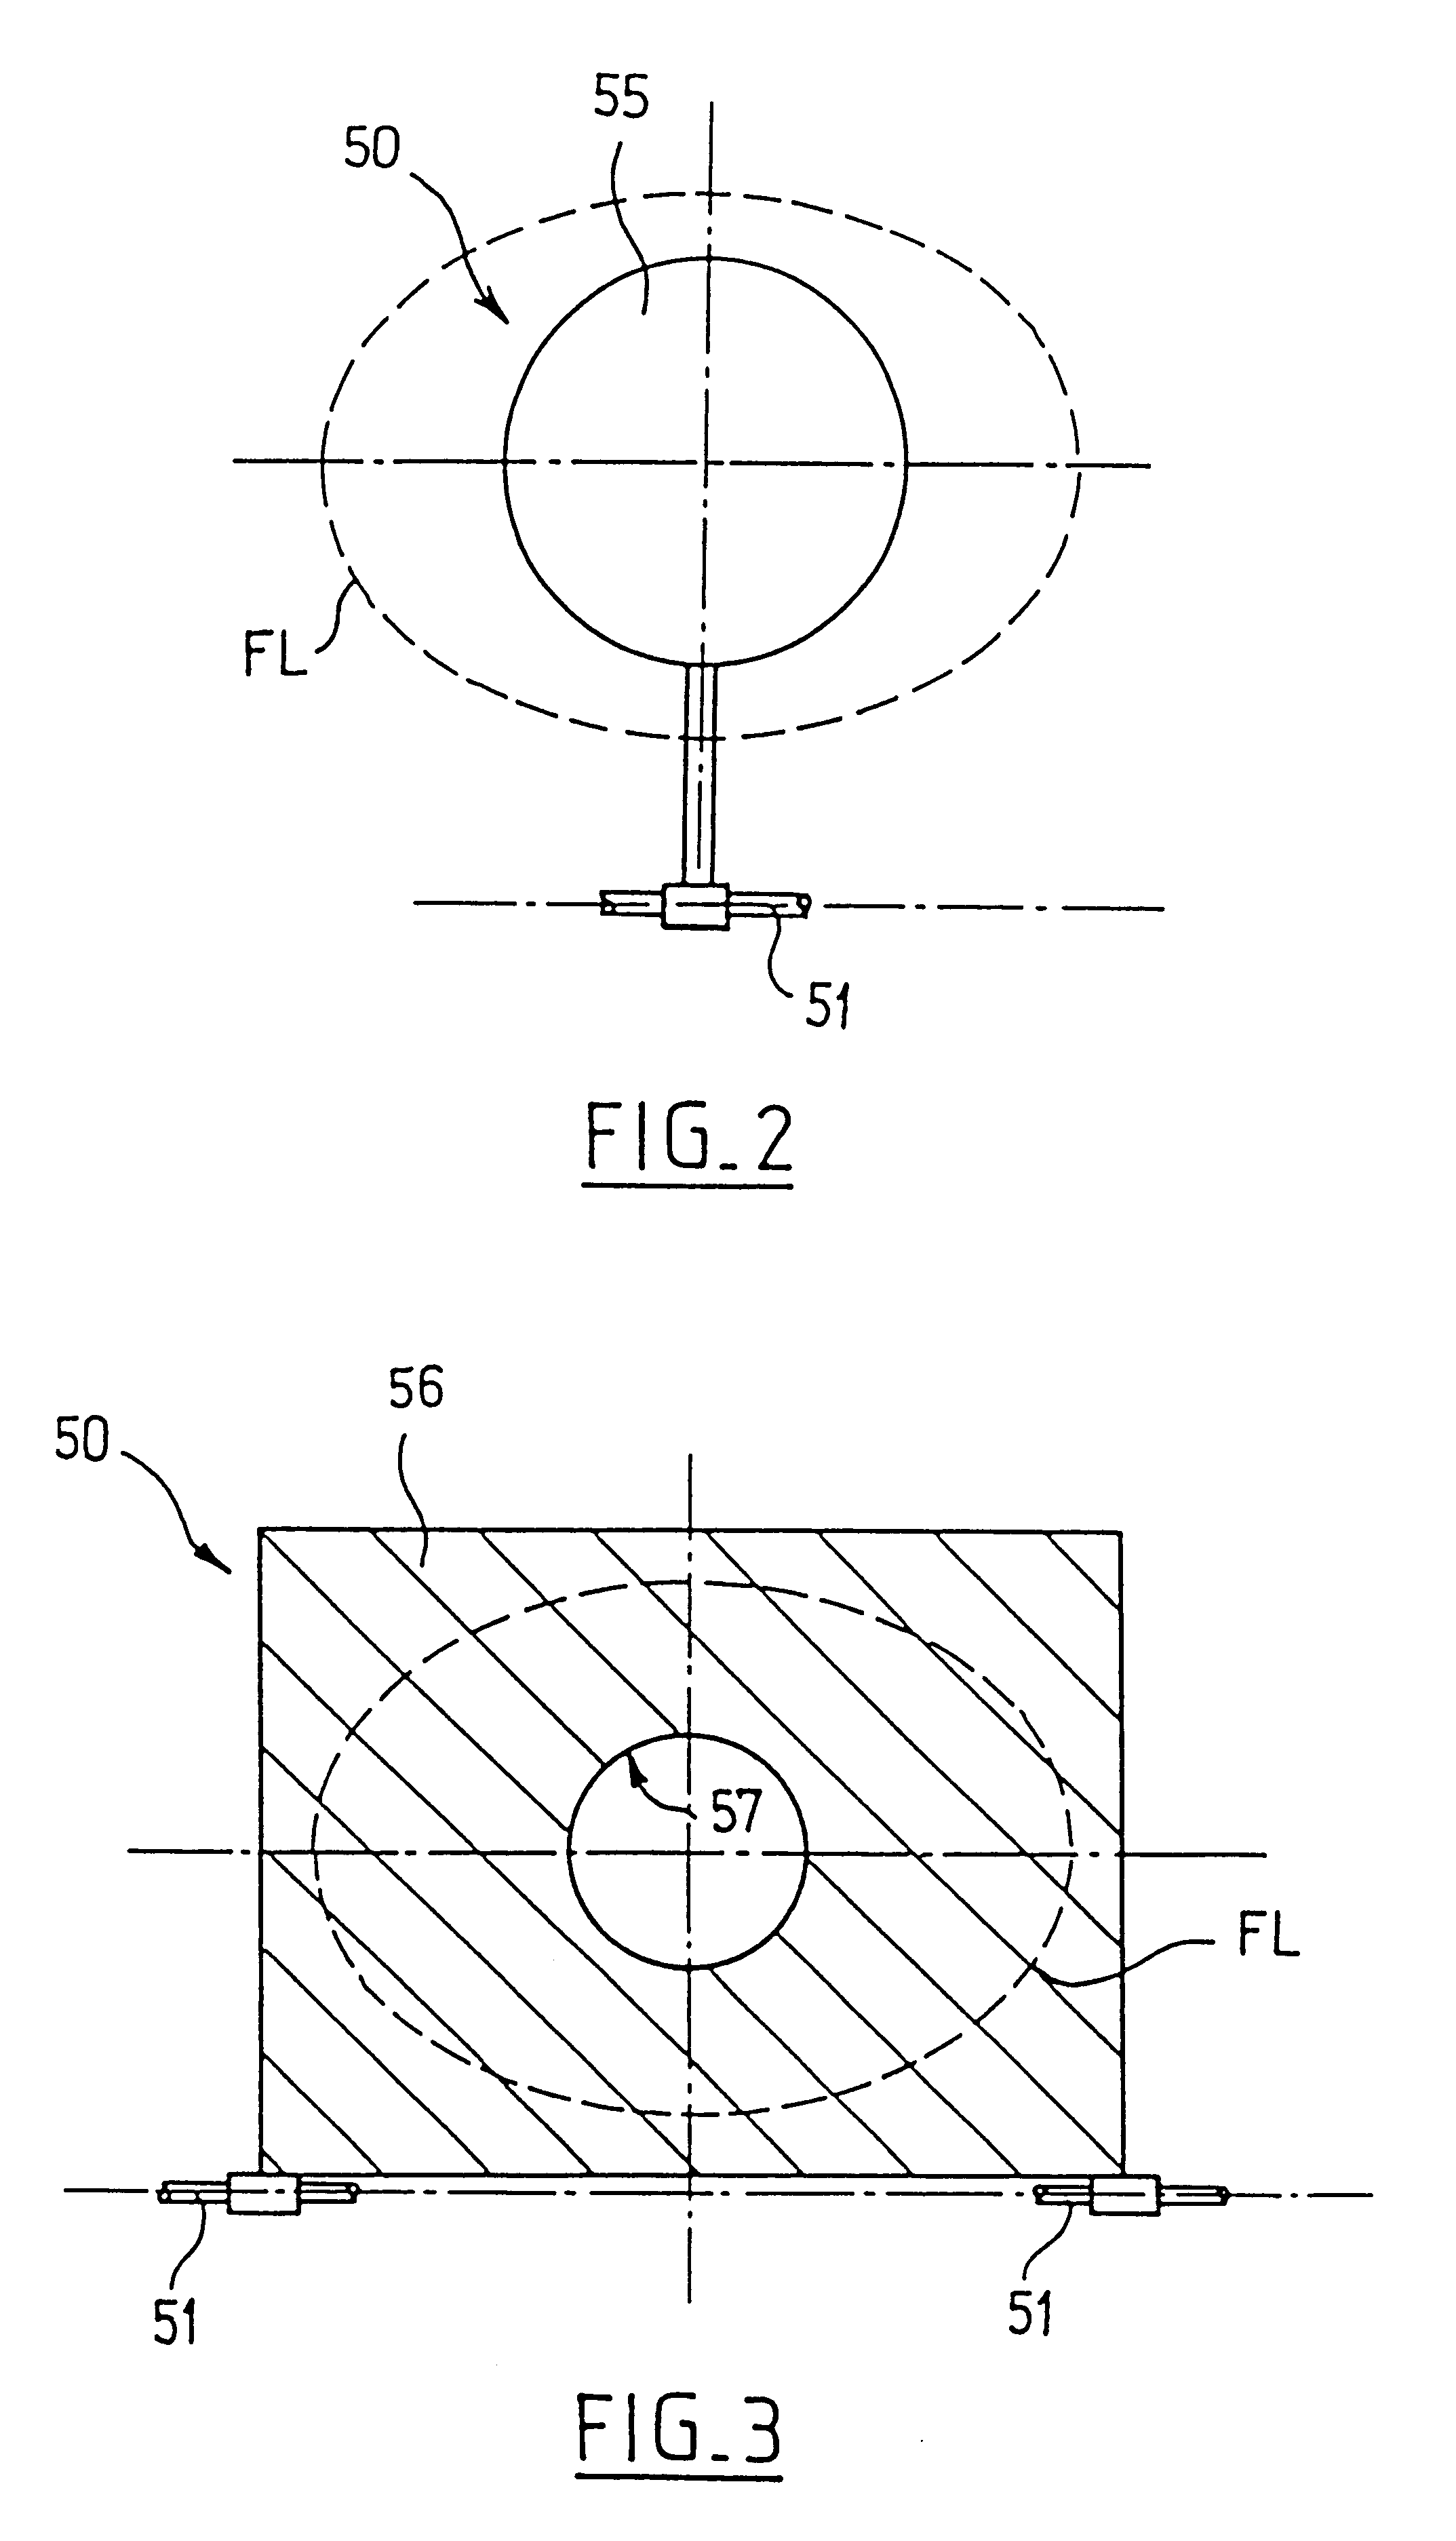 Motor vehicle lighting system with a signaling function for use in daylight